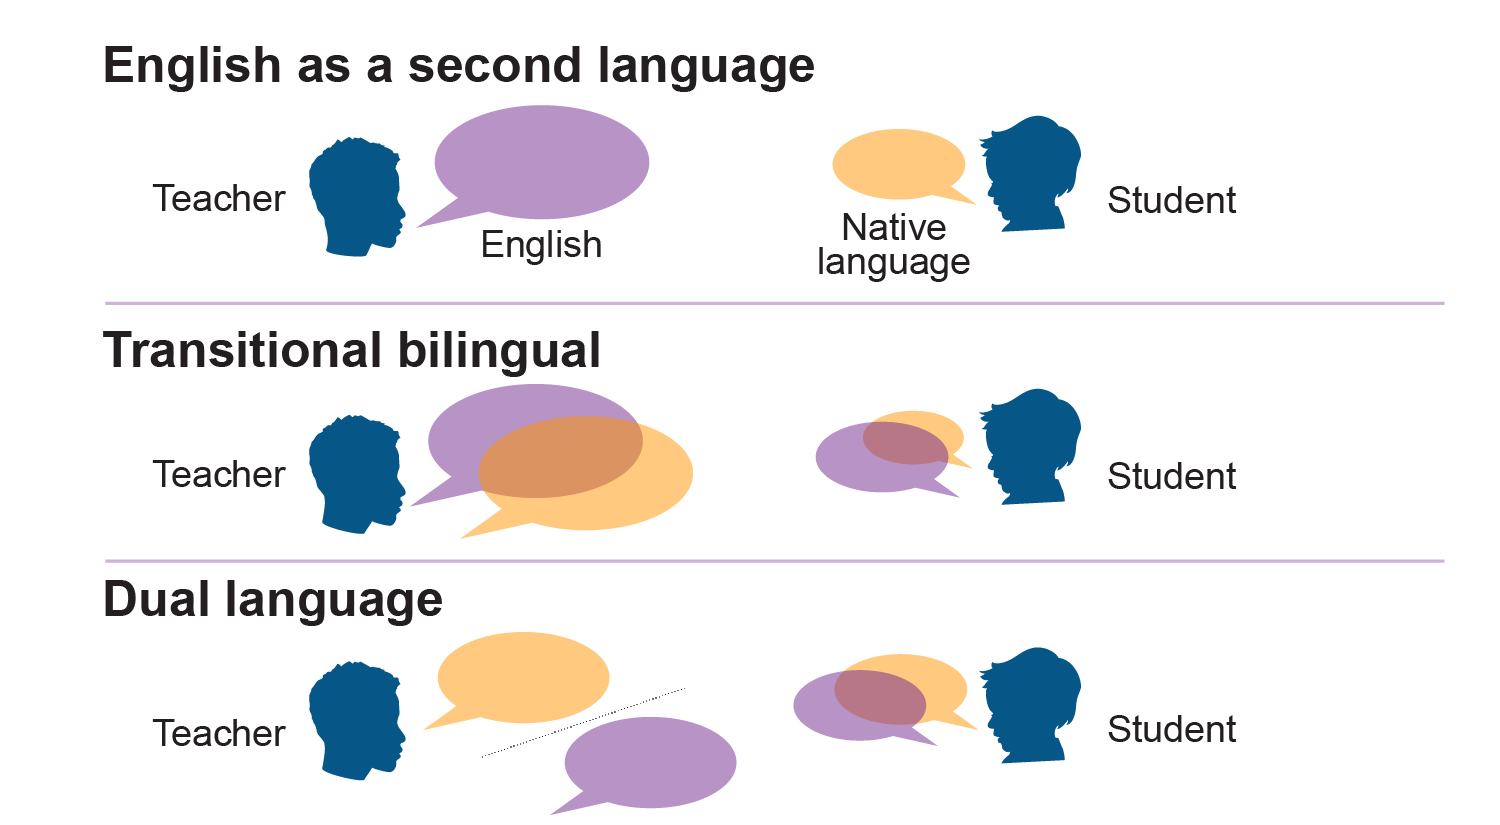 Illustrating the distinction among three models: English as a second language, transitional bilingual and dual language